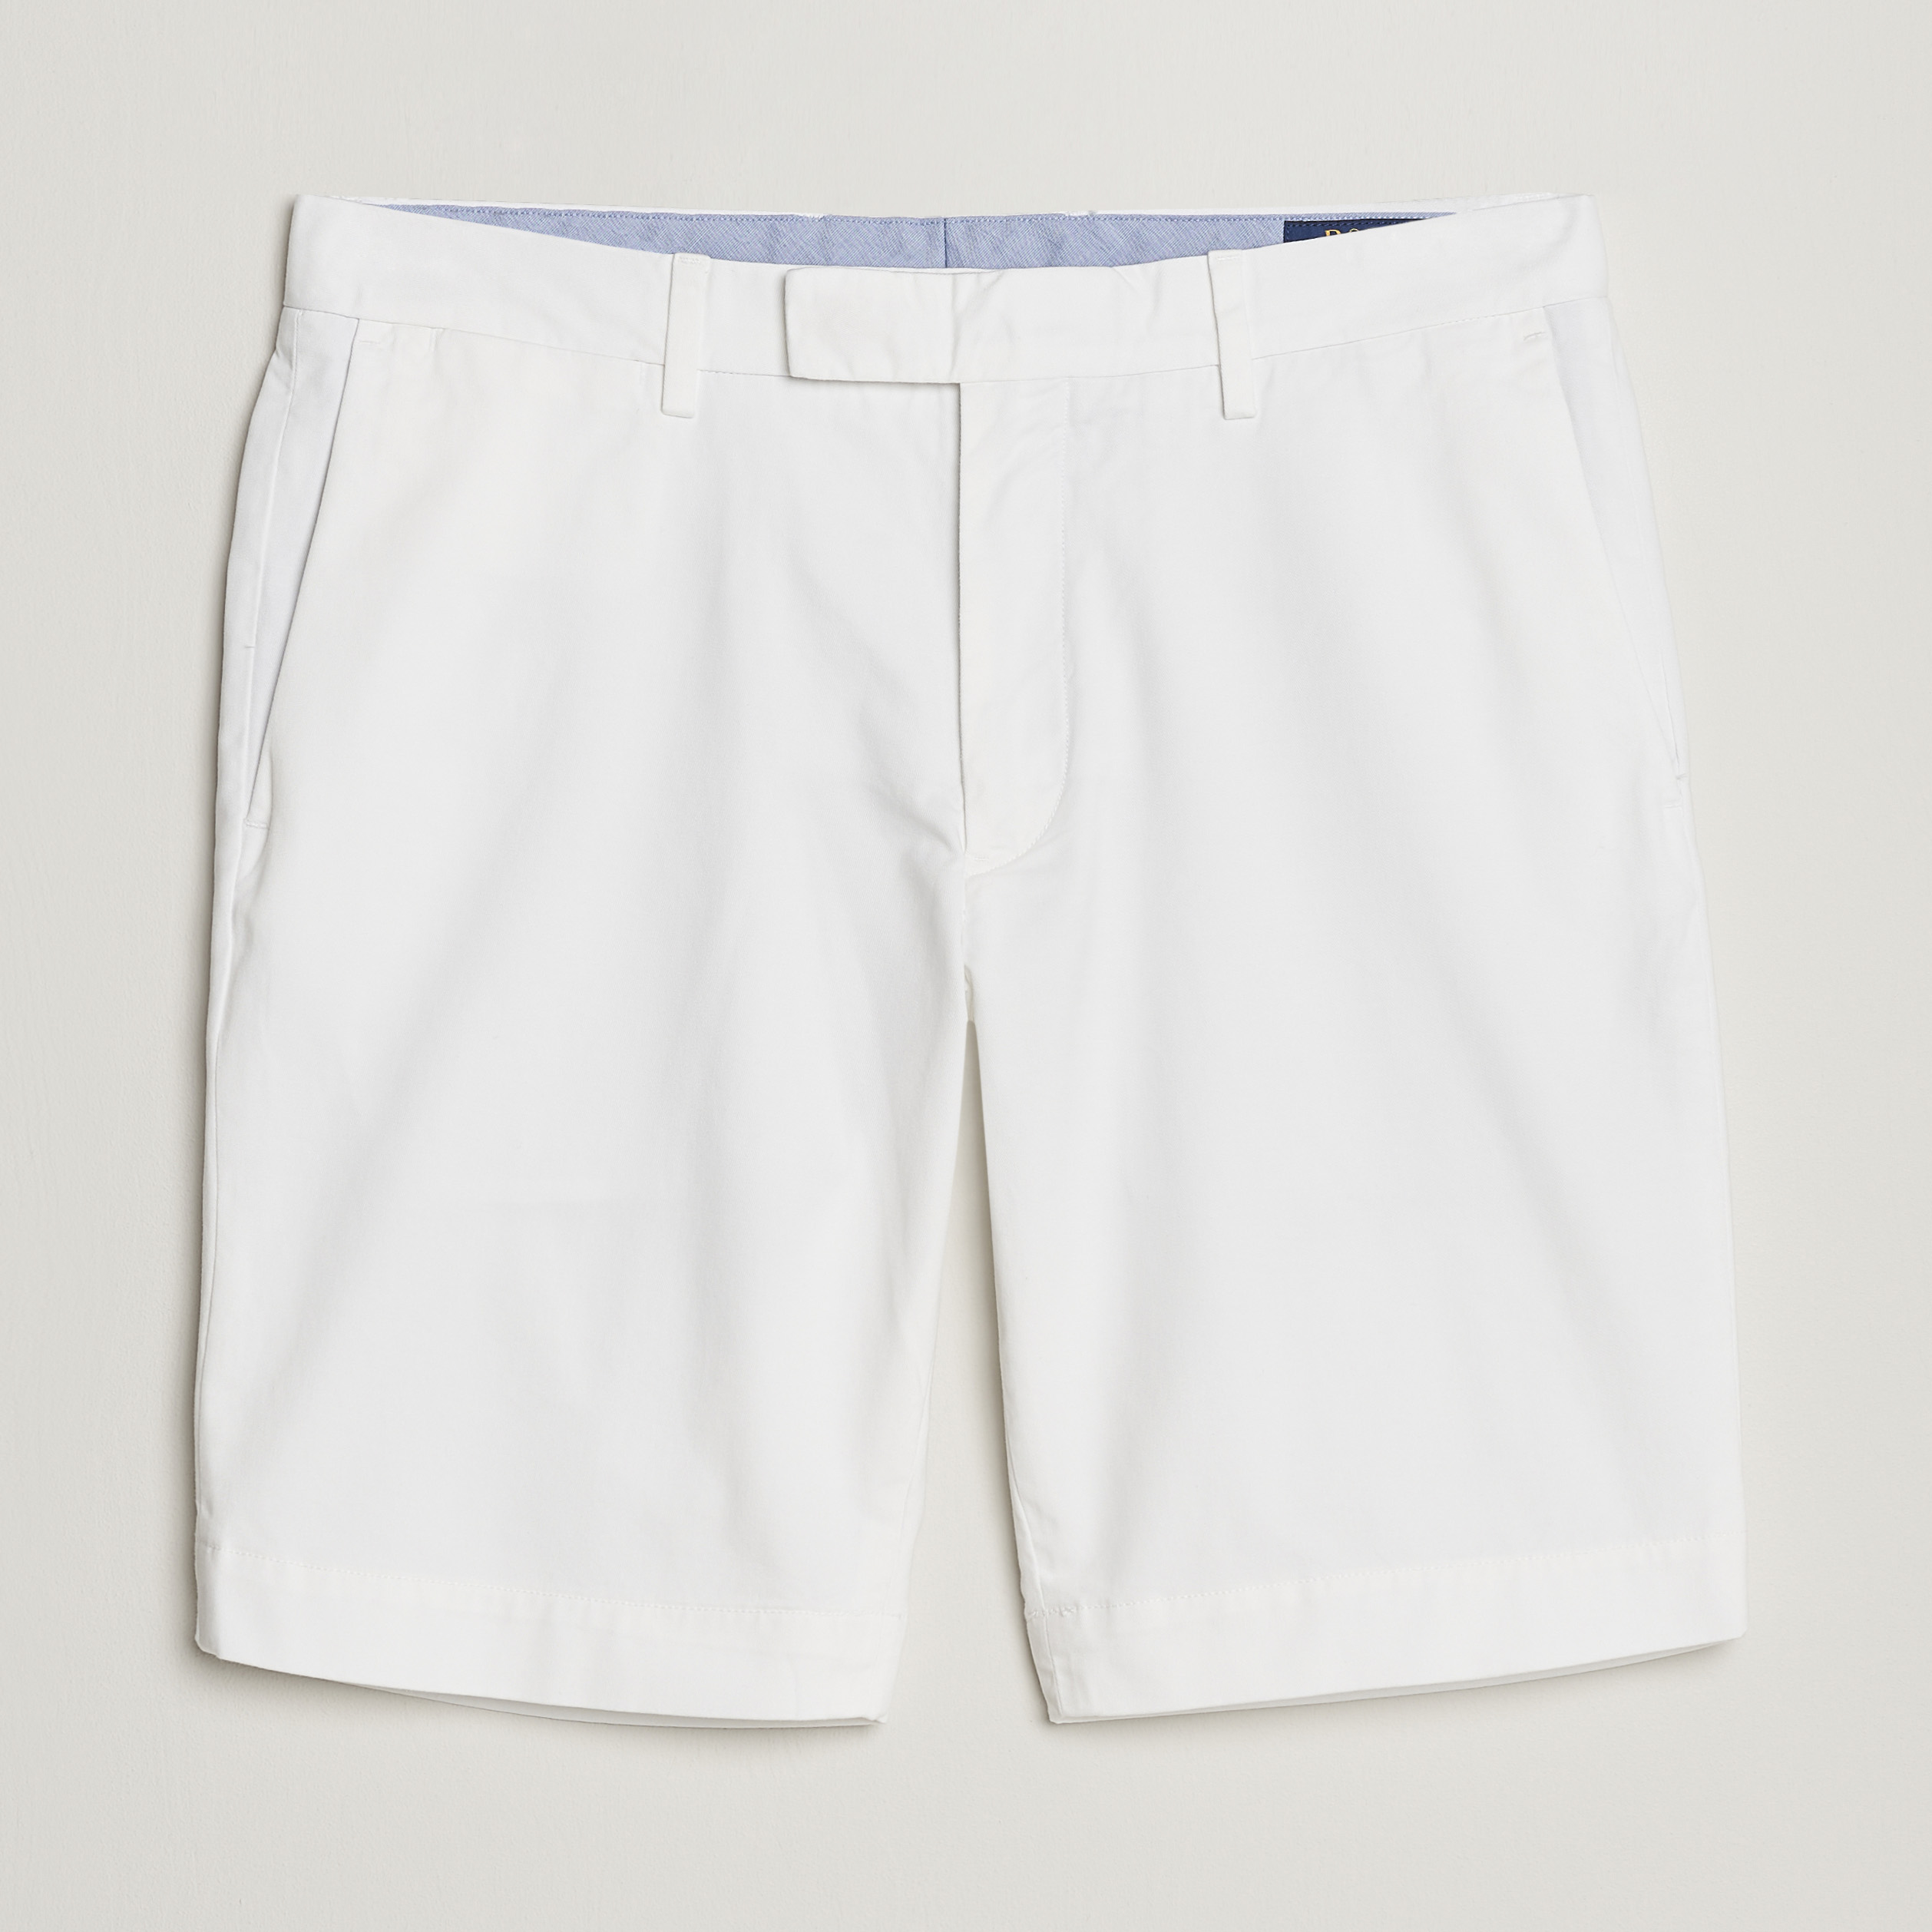 Polo Ralph Lauren Tailored Slim Fit Shorts White at